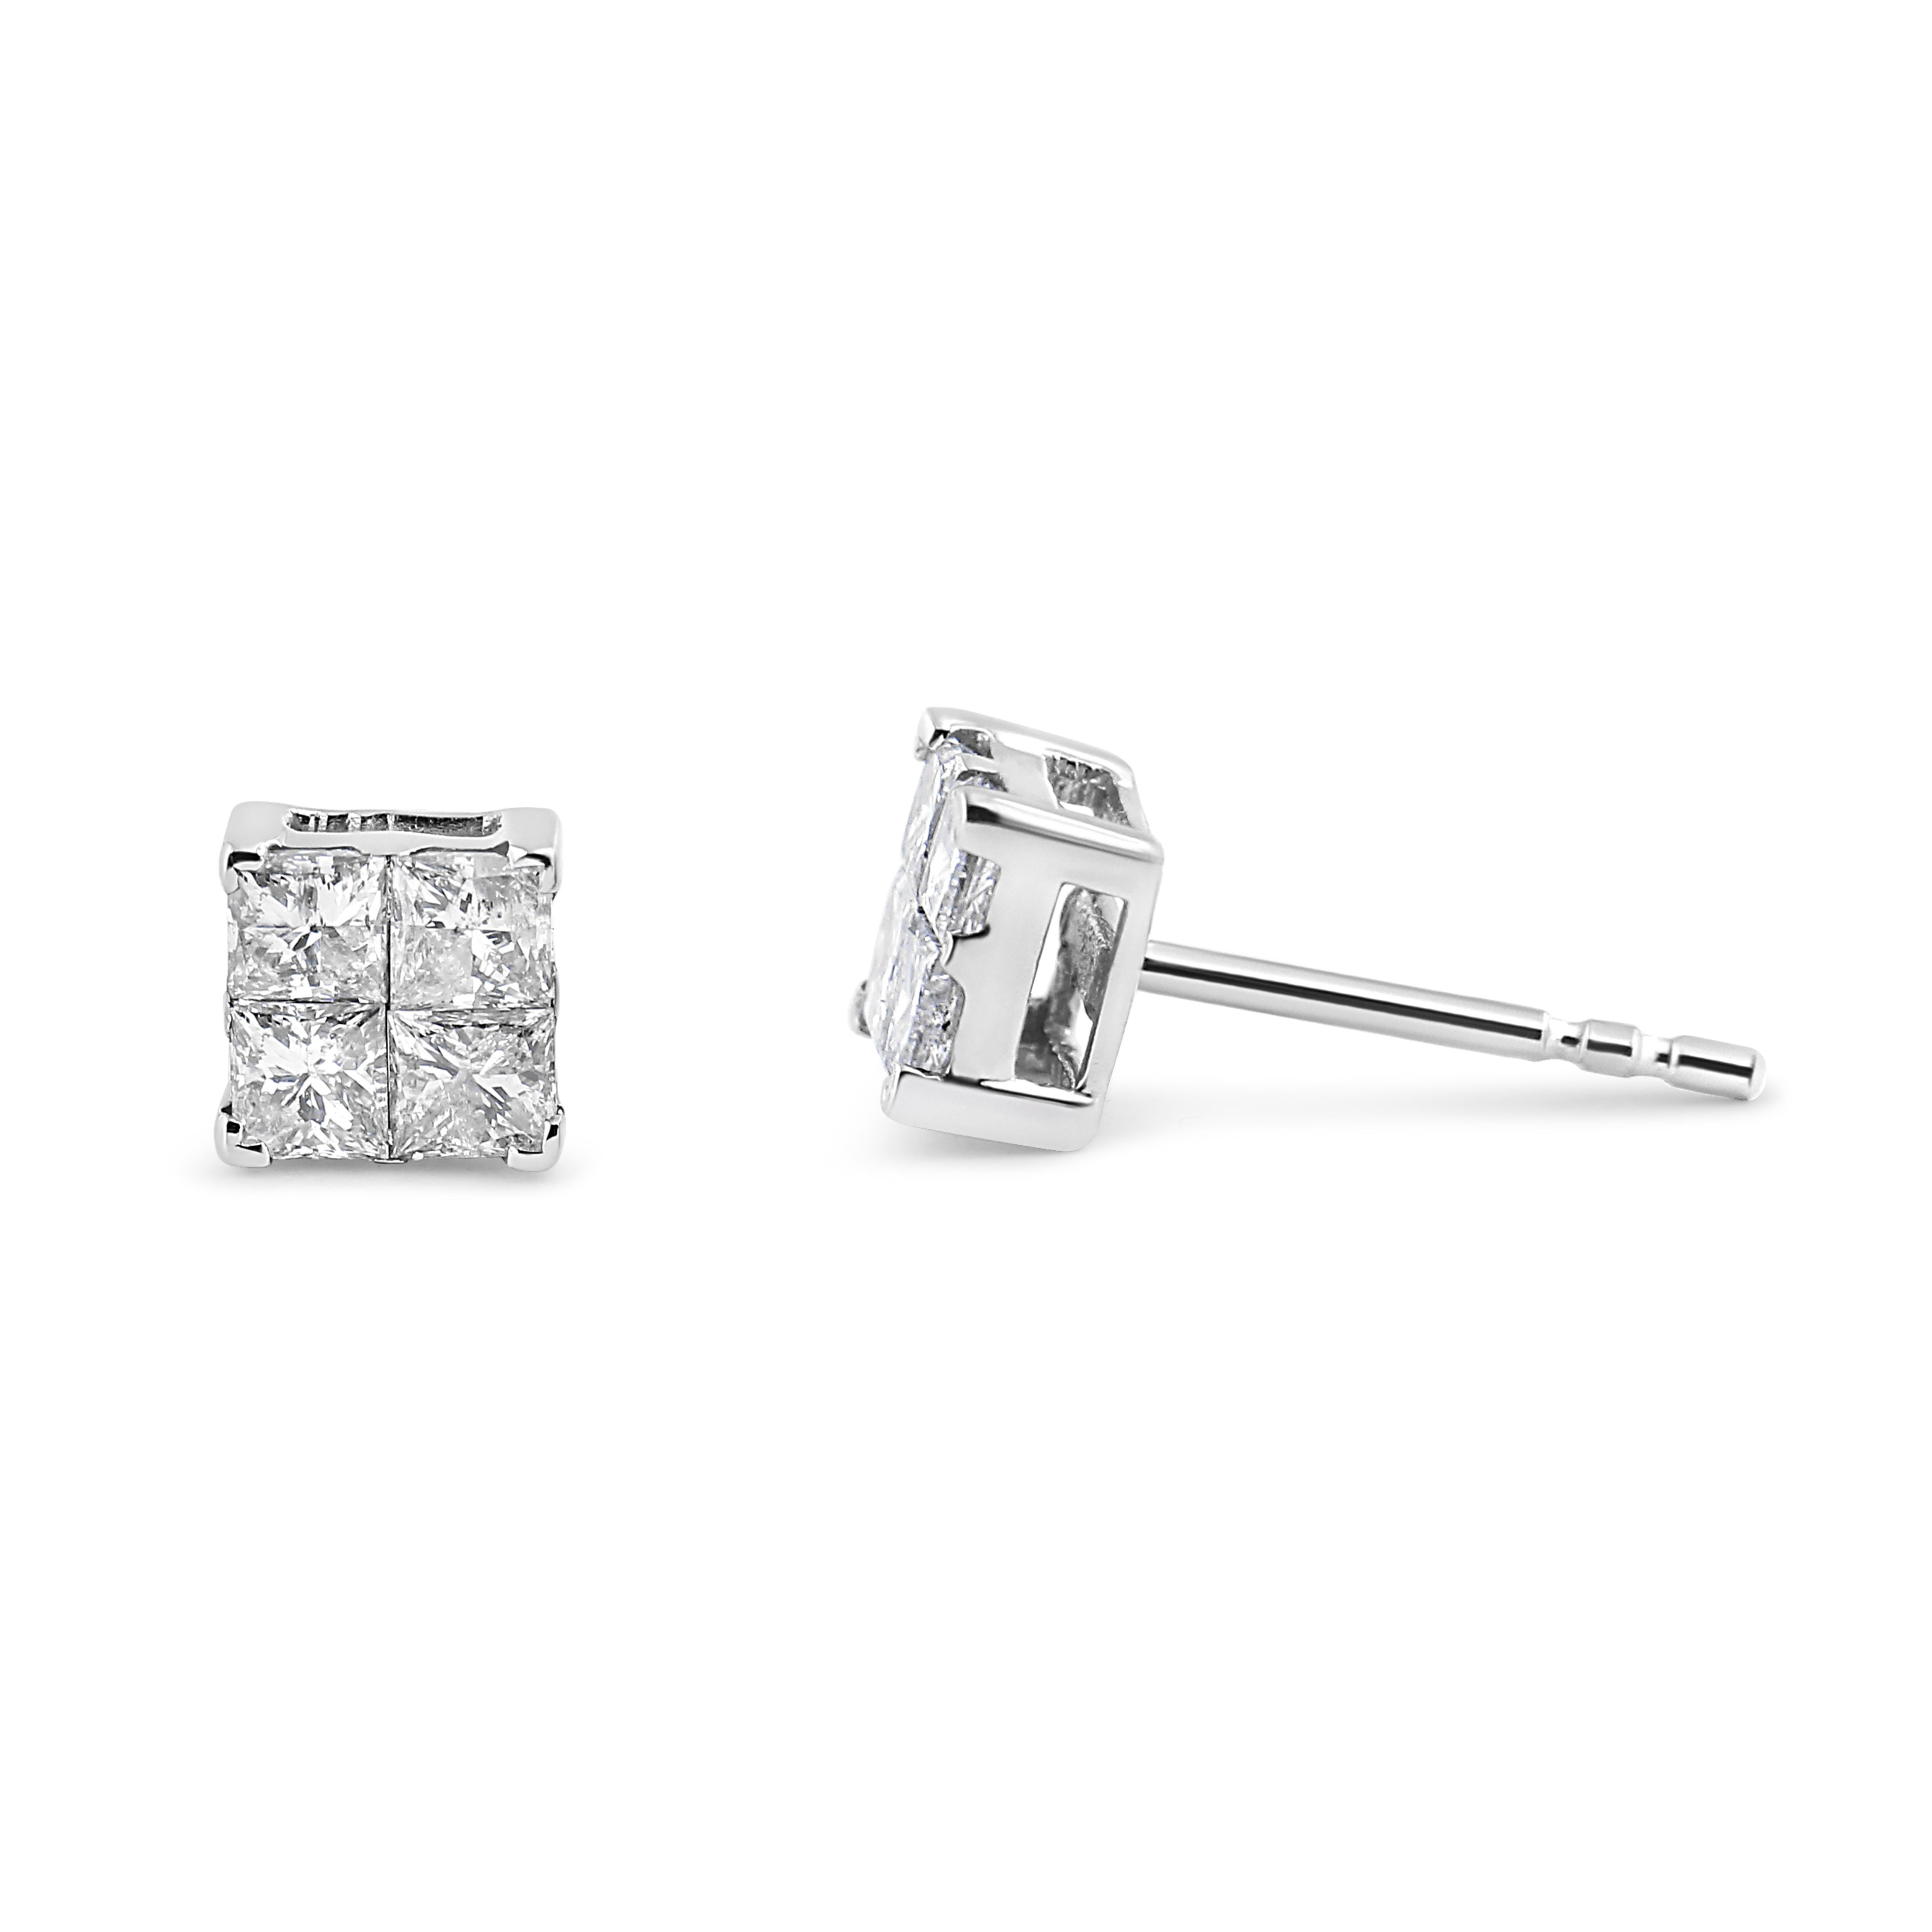 Get ready for the compliments when you wear these shimmering diamond stud earrings. Crafted in cool 10K white gold, each squared earring features 4 invisible set, princess-cut diamonds that create a dazzling appearance of a larger diamond. Radiant